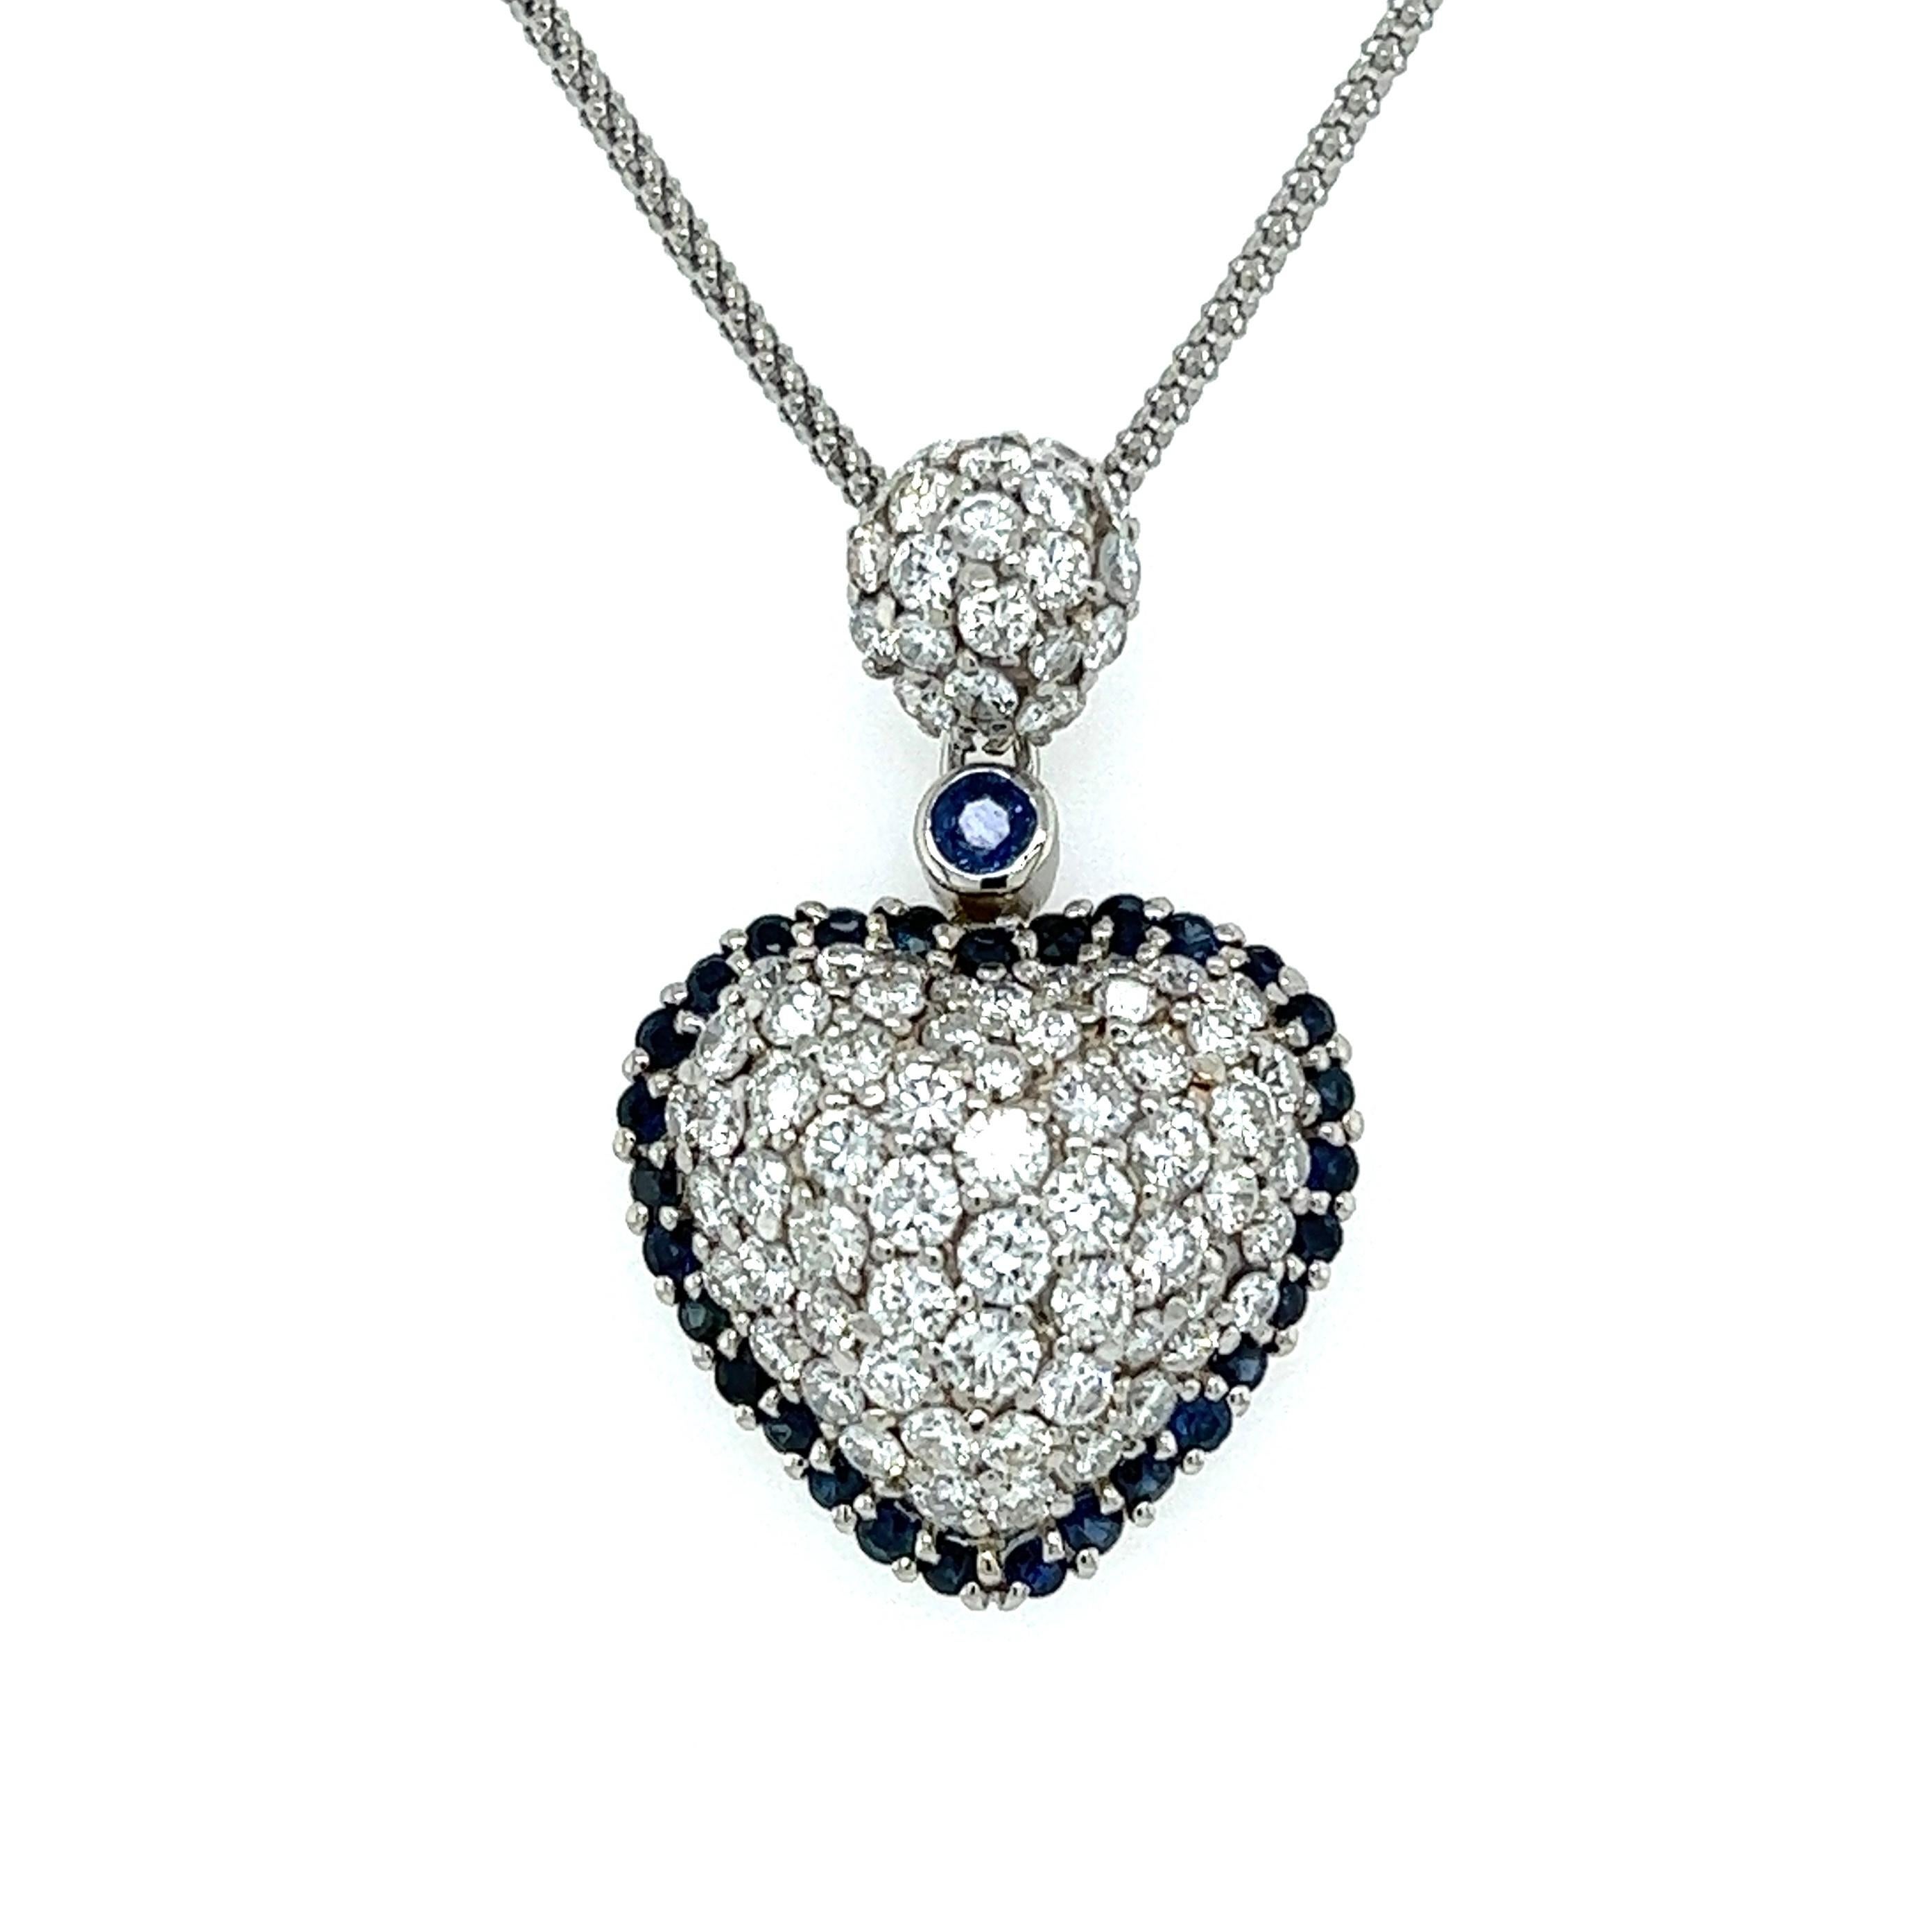 Simply Beautiful! Finely detailed Diamond and Sapphire Halo Heart Platinum Pendant Necklace. Centering Pave Hand set Diamonds, weighing approx. 2.65tcw, surrounded by Blue Sapphires, approx. 0.95tcw. Pendant size: 1.25” l x 0.80” w. Hand crafted in